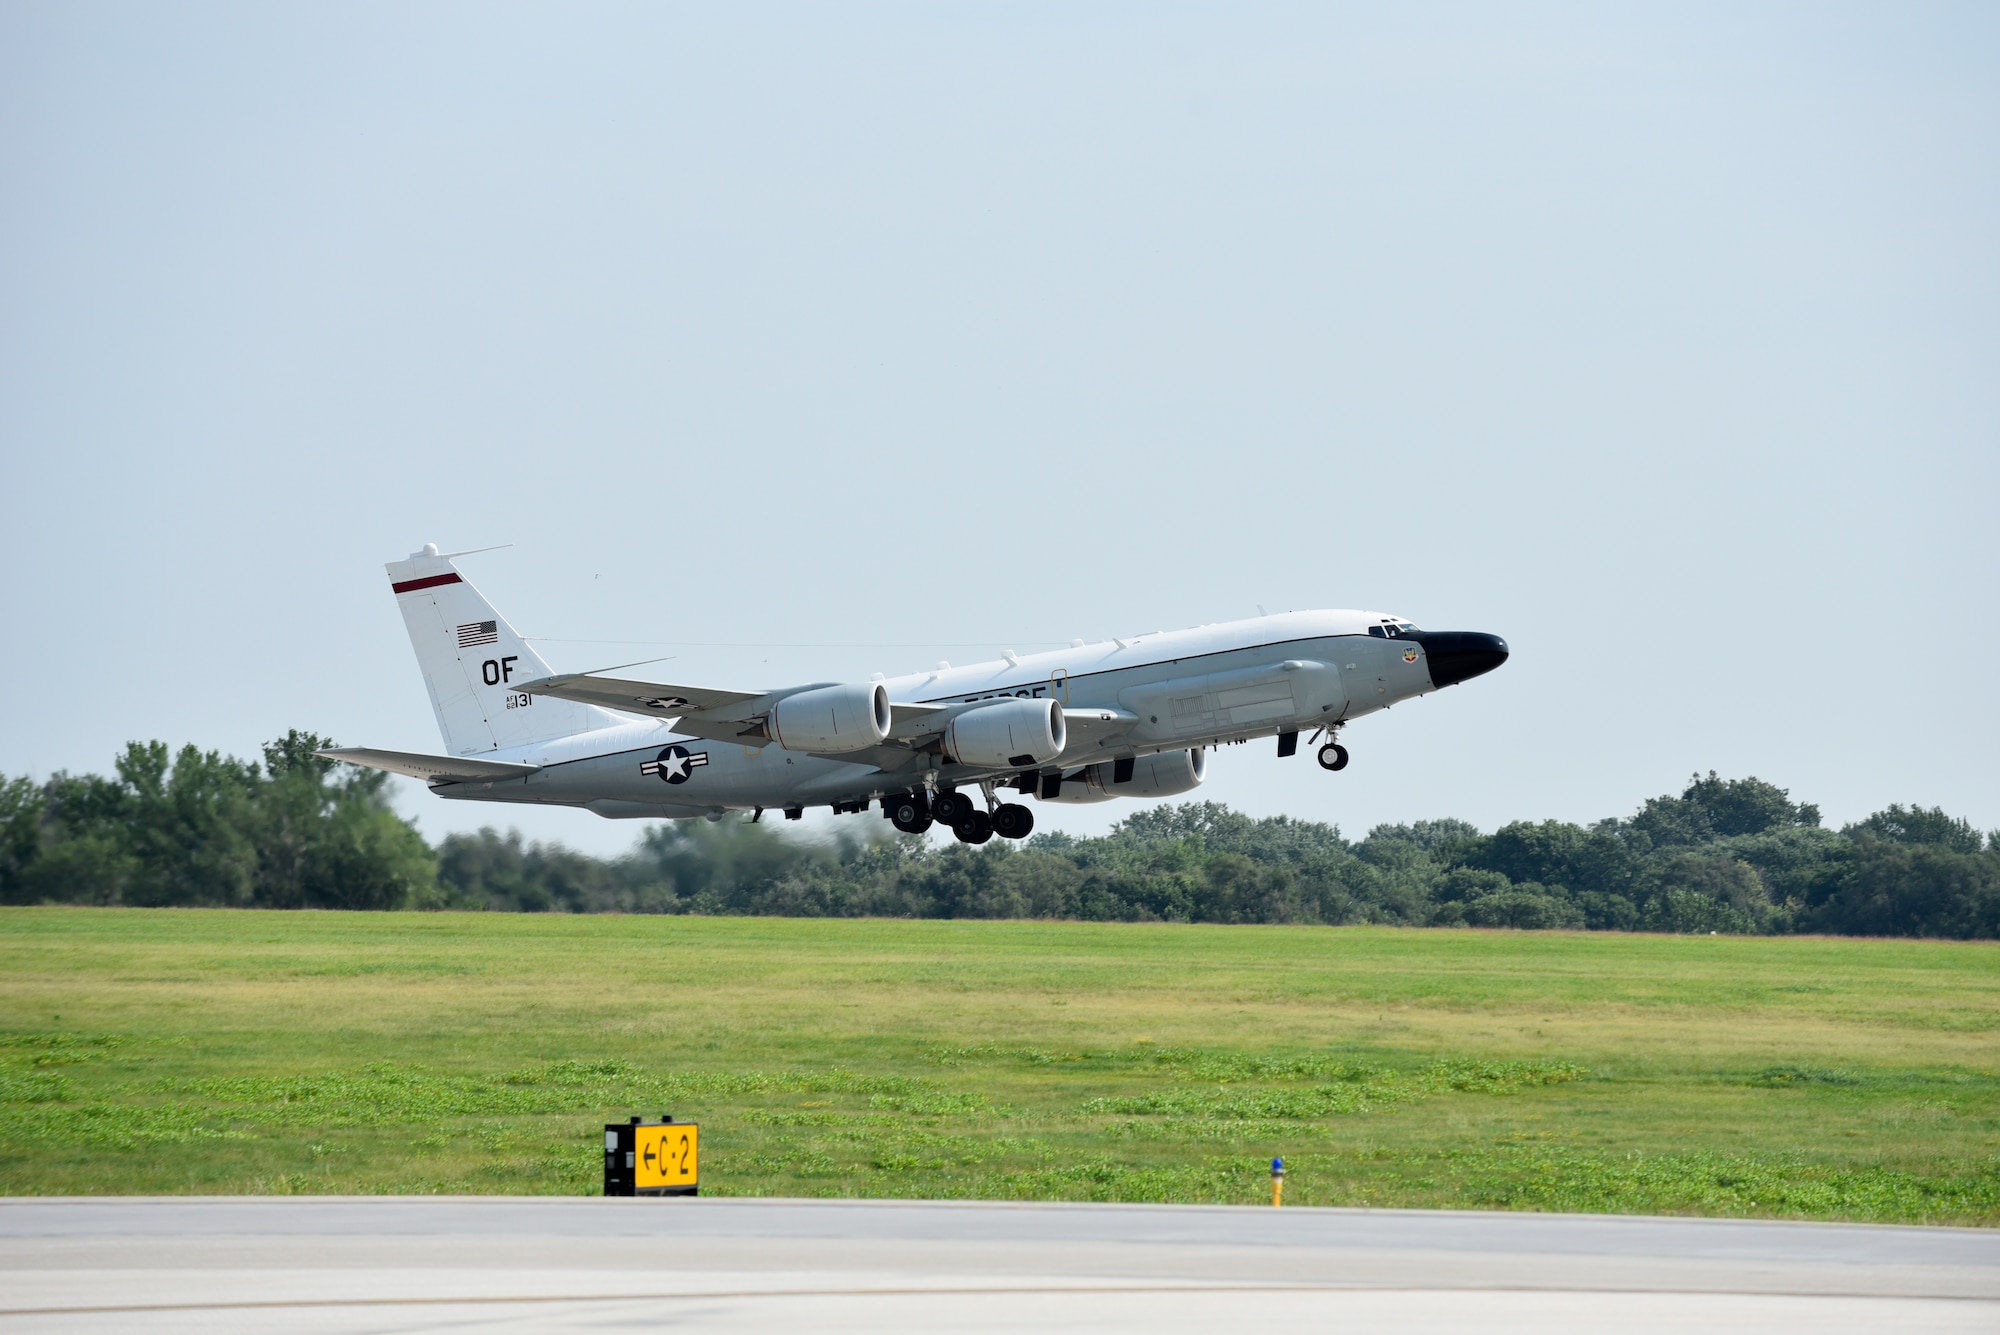 An Offutt-based RC-135V/W Rivet Joint takes flight Aug. 5, 2018 at Offutt Air Force Base, Nebraska. The aircraft was flown during a unique training sortie with a flight and mission-crew comprised almost exclusively of reserve component Airmen. The aircraft is an extensively modified C-135. The Rivet Joint's modifications are primarily related to its on-board sensor suite, which allows the mission-crew to detect, identify and geolocate signals throughout the electromagnetic spectrum. The mission-crew can then forward gathered information in a variety of formats to a wide range of consumers via Rivet Joint's extensive communications suite. (U.S. Air Force photo by 2nd Lt. Drew Nystrom)